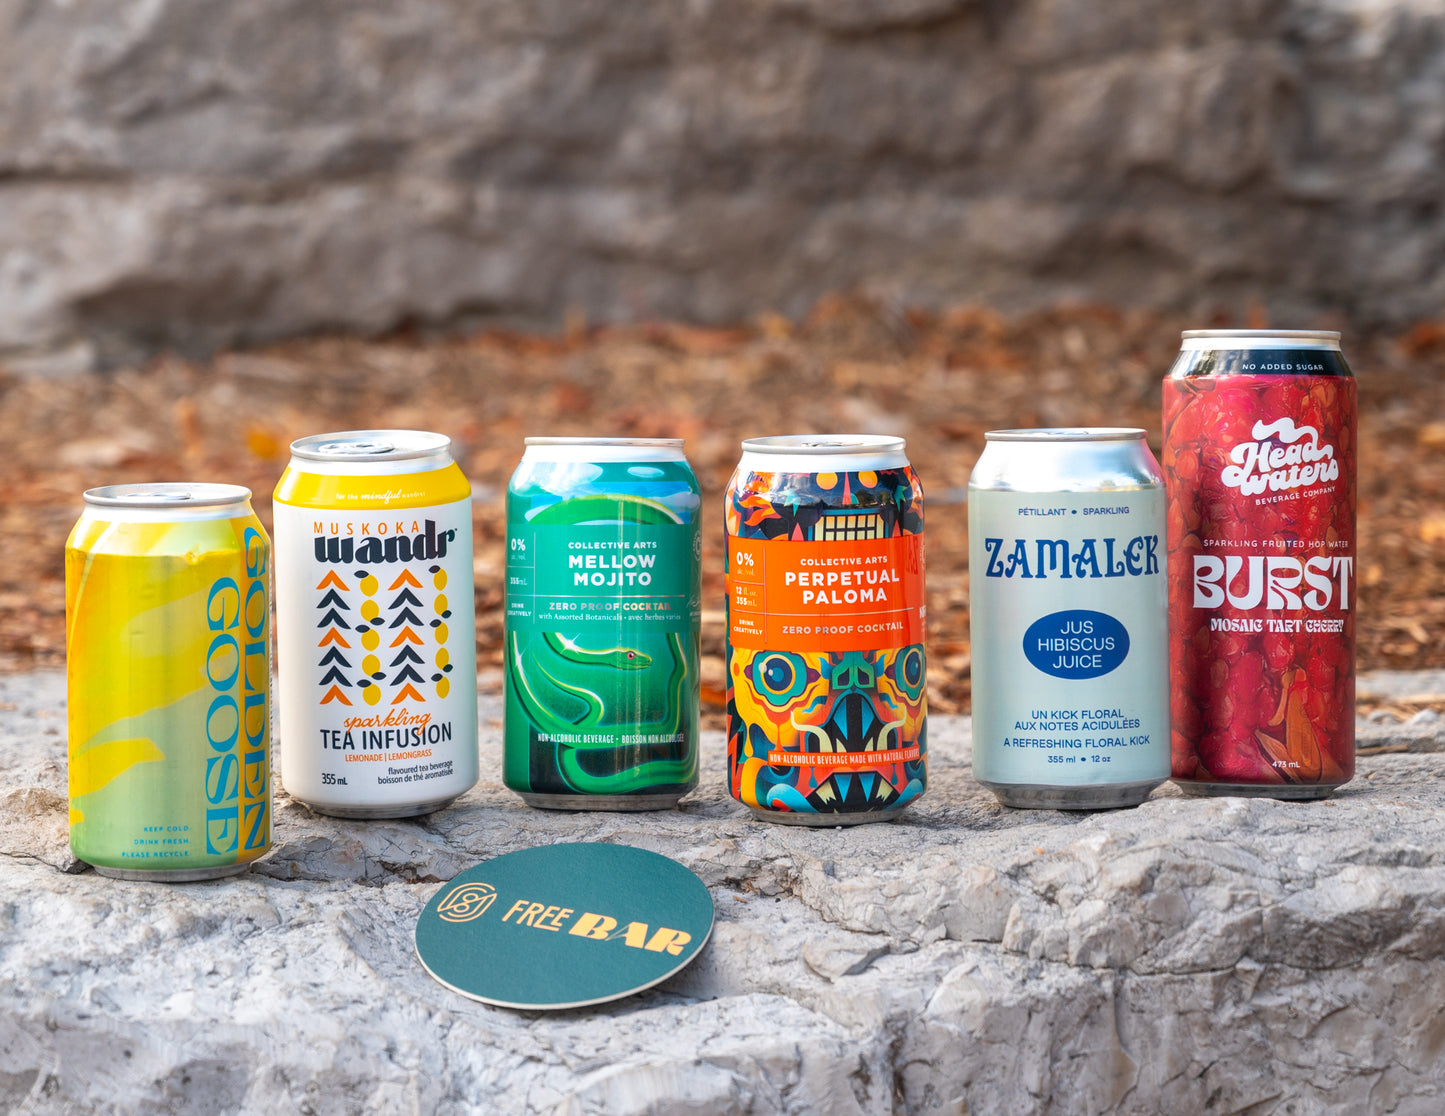 October Non-Alc Discovery Cocktails Box Lineup